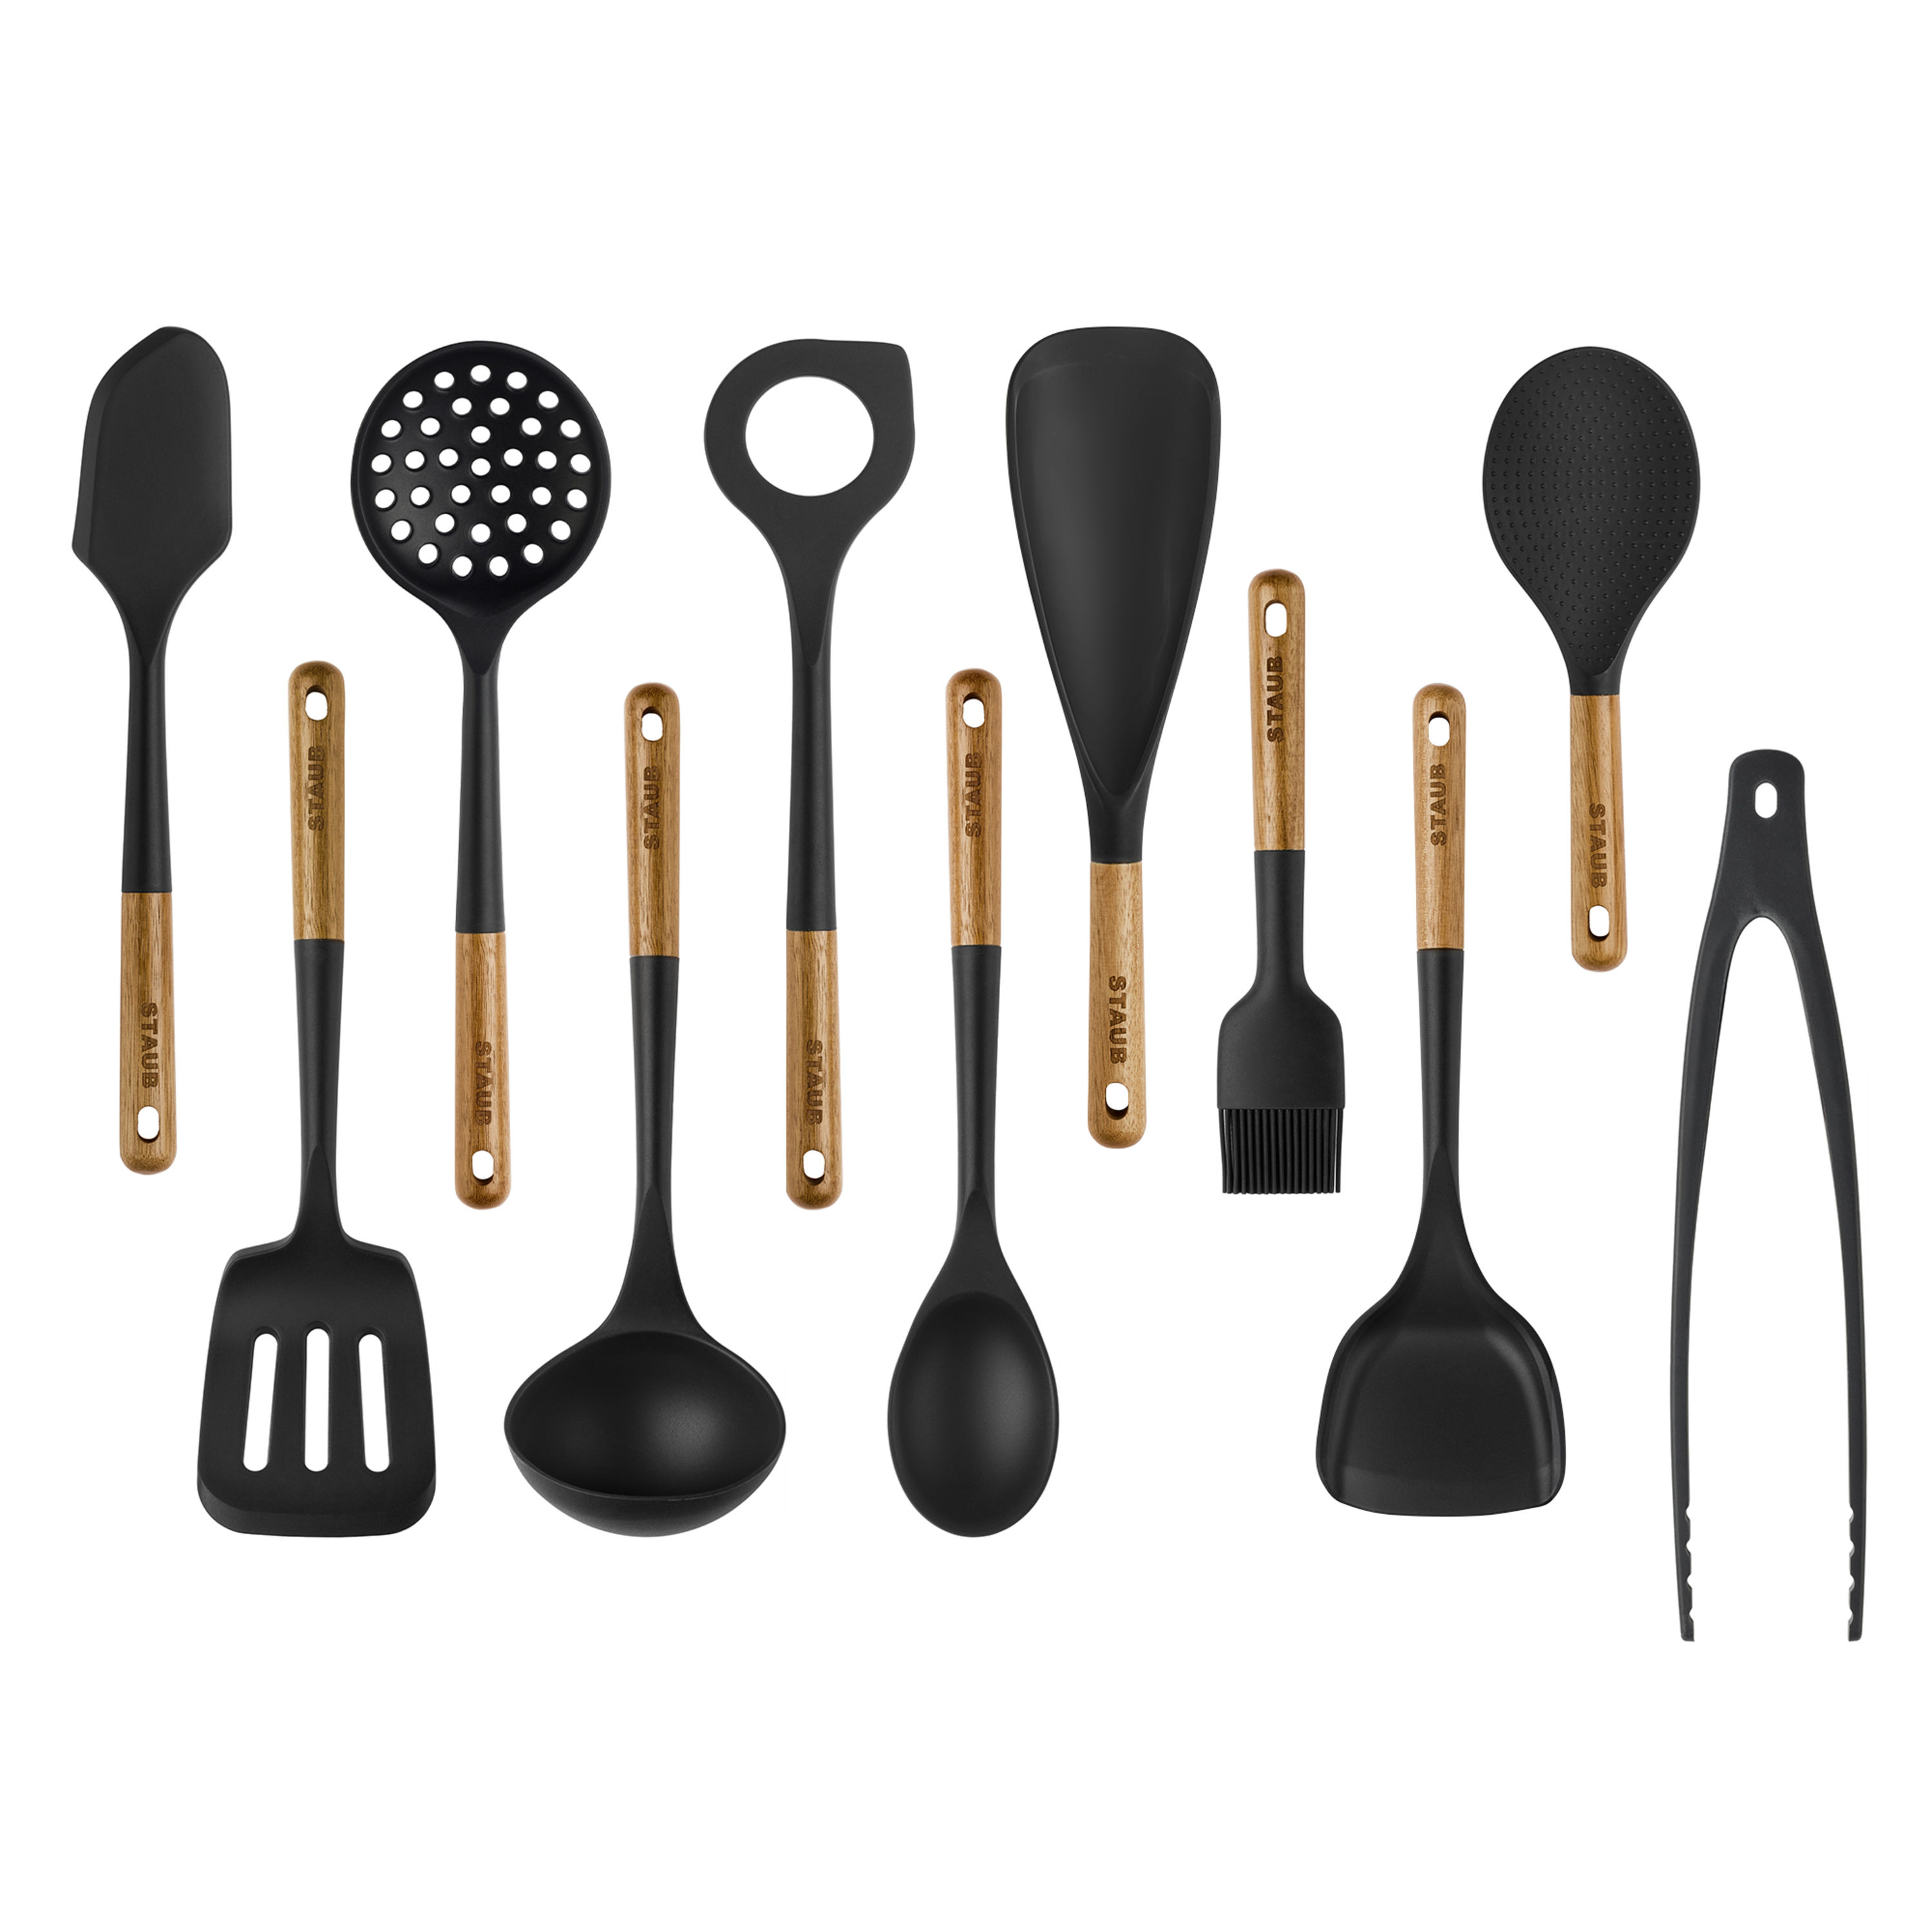 Country Kitchen Silicone Cooking Utensils, 8 Pc Kitchen Utensil